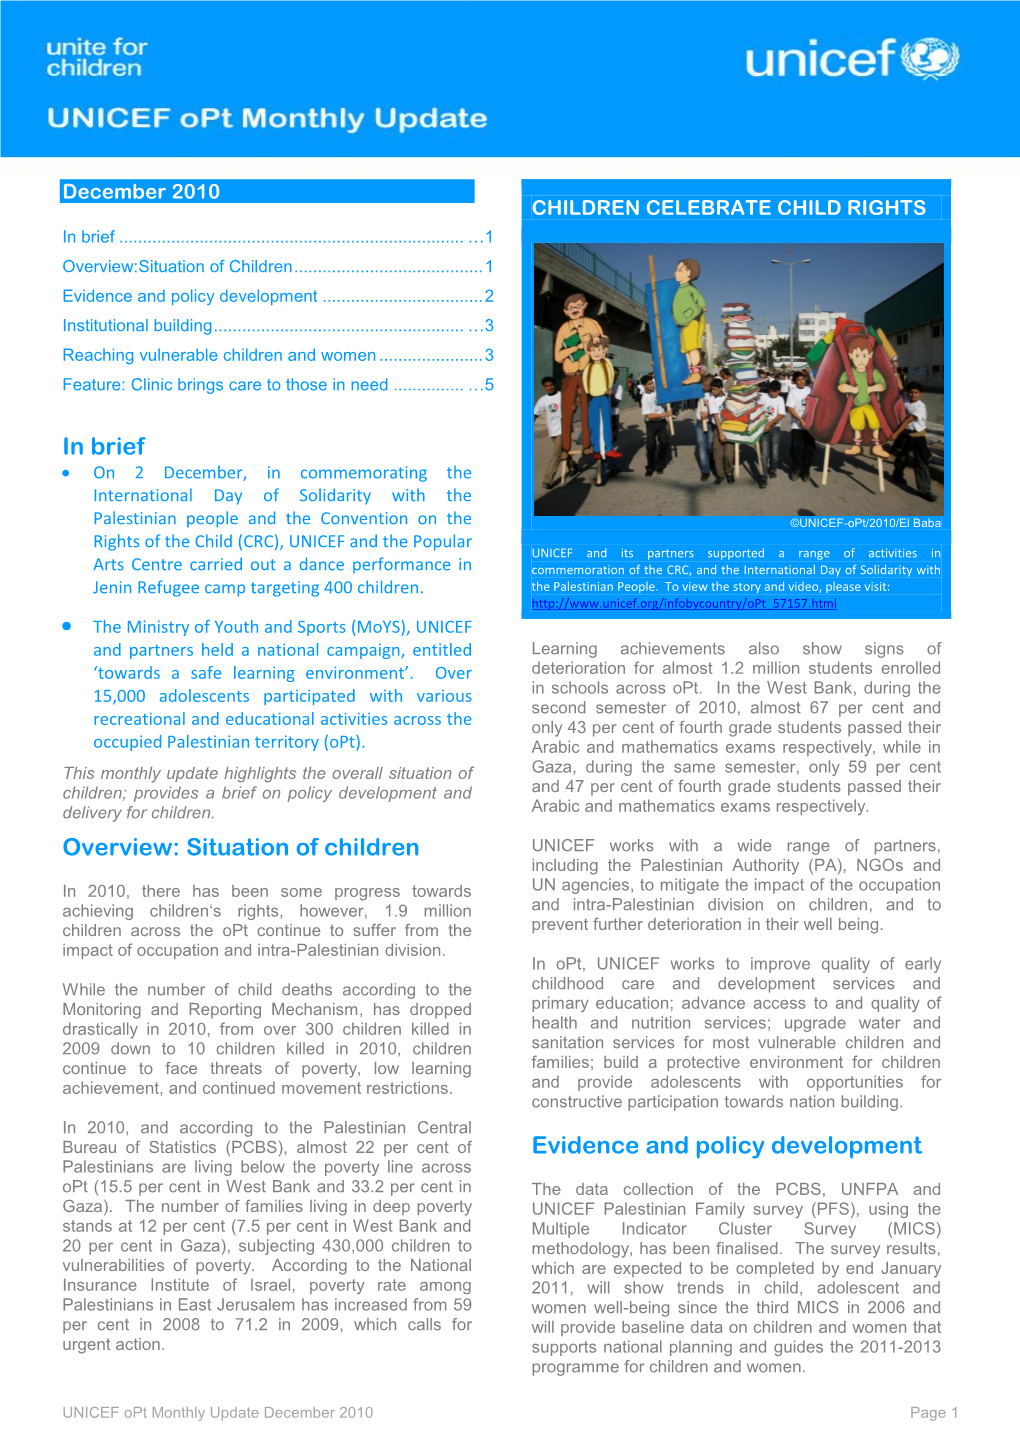 Situation of Children Evidence and Policy Development